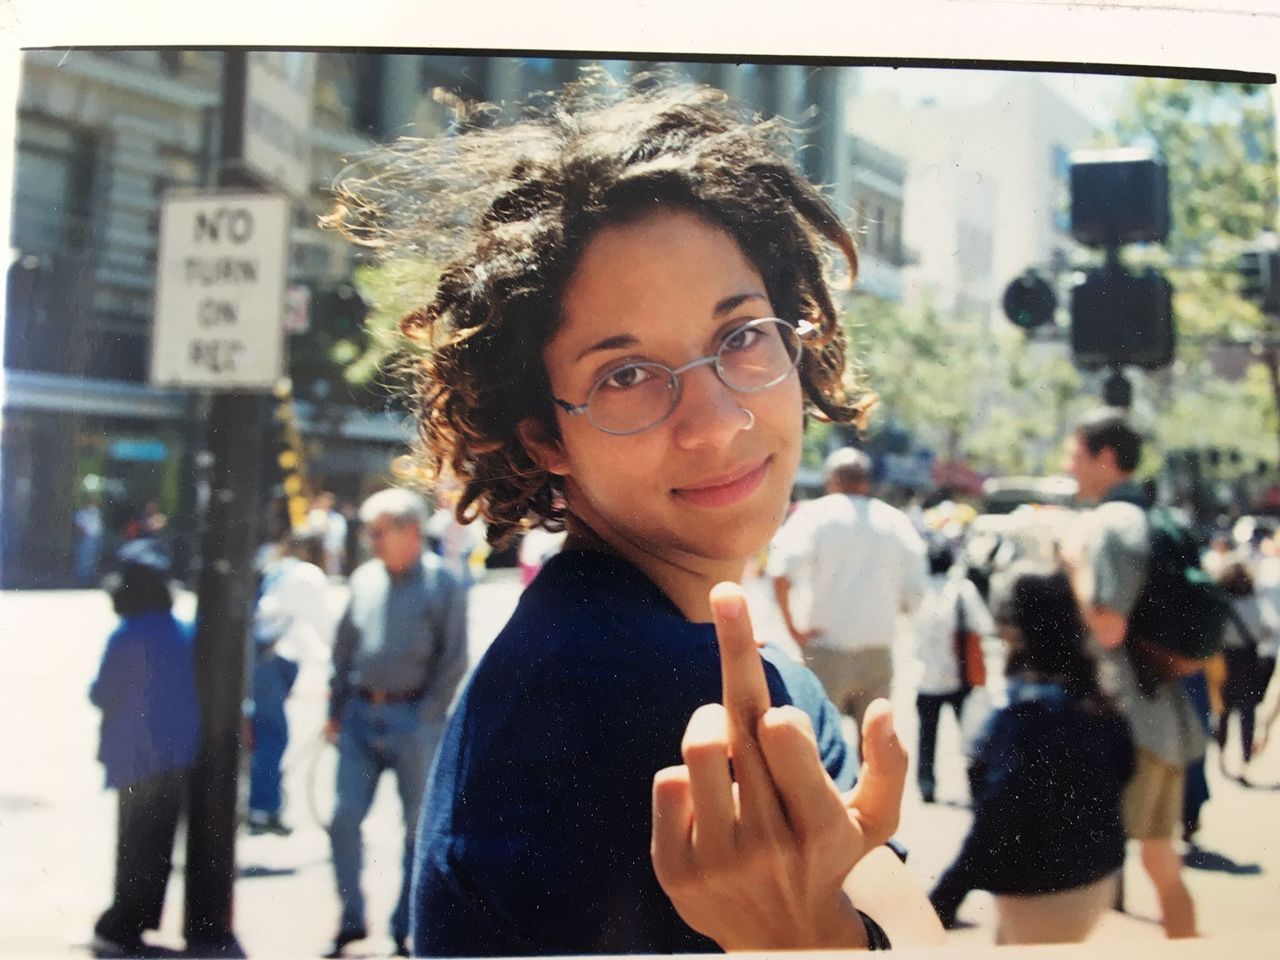 Sushila Mesquita in New York City, the week after Ladyfest in 2000.